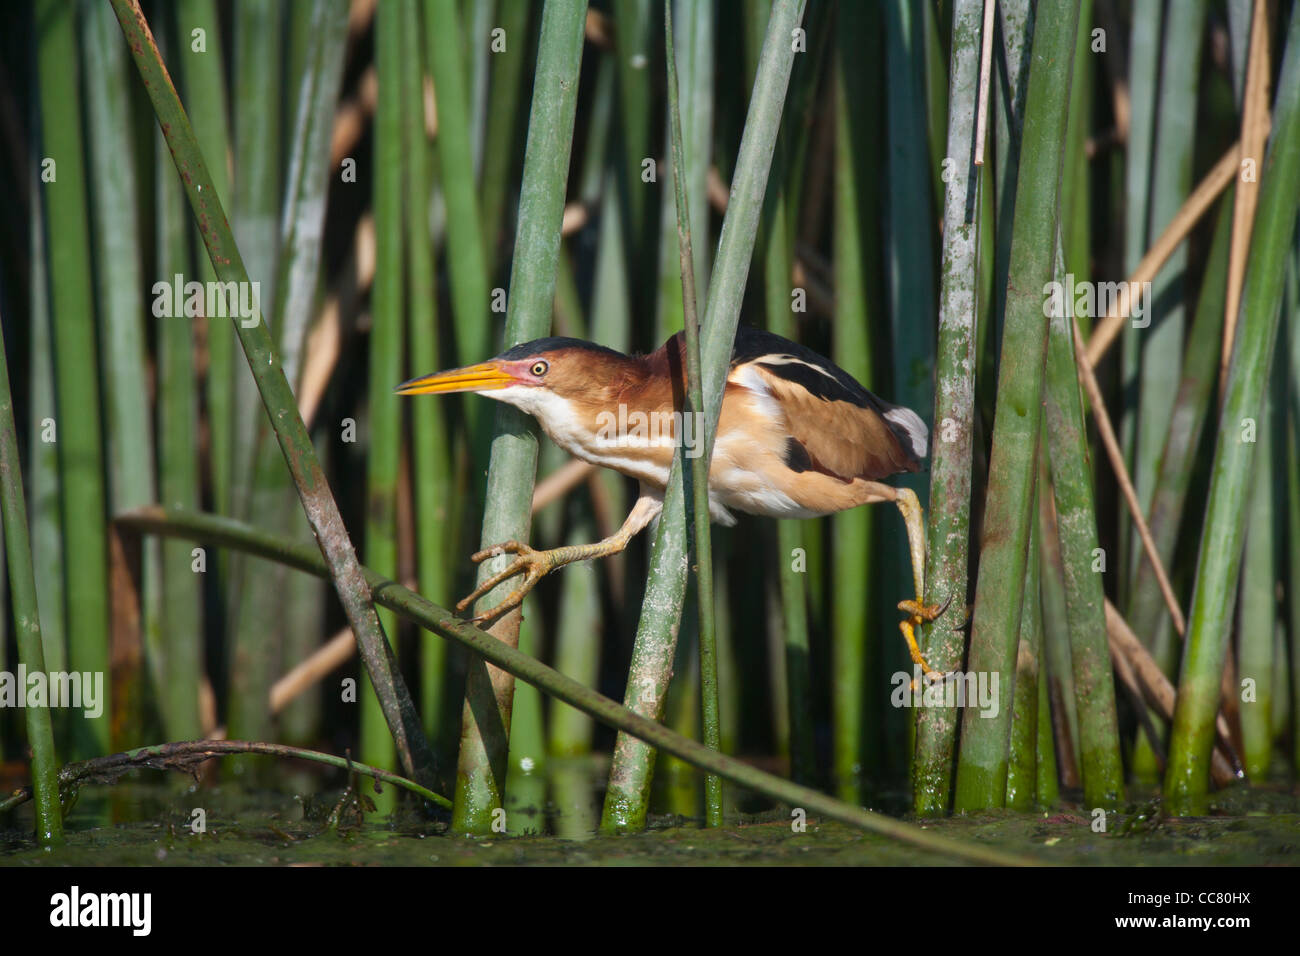 The Least Bittern (Ixobrychus exilis) is a small wading bird, the smallest heron found in the Americas. Stock Photo